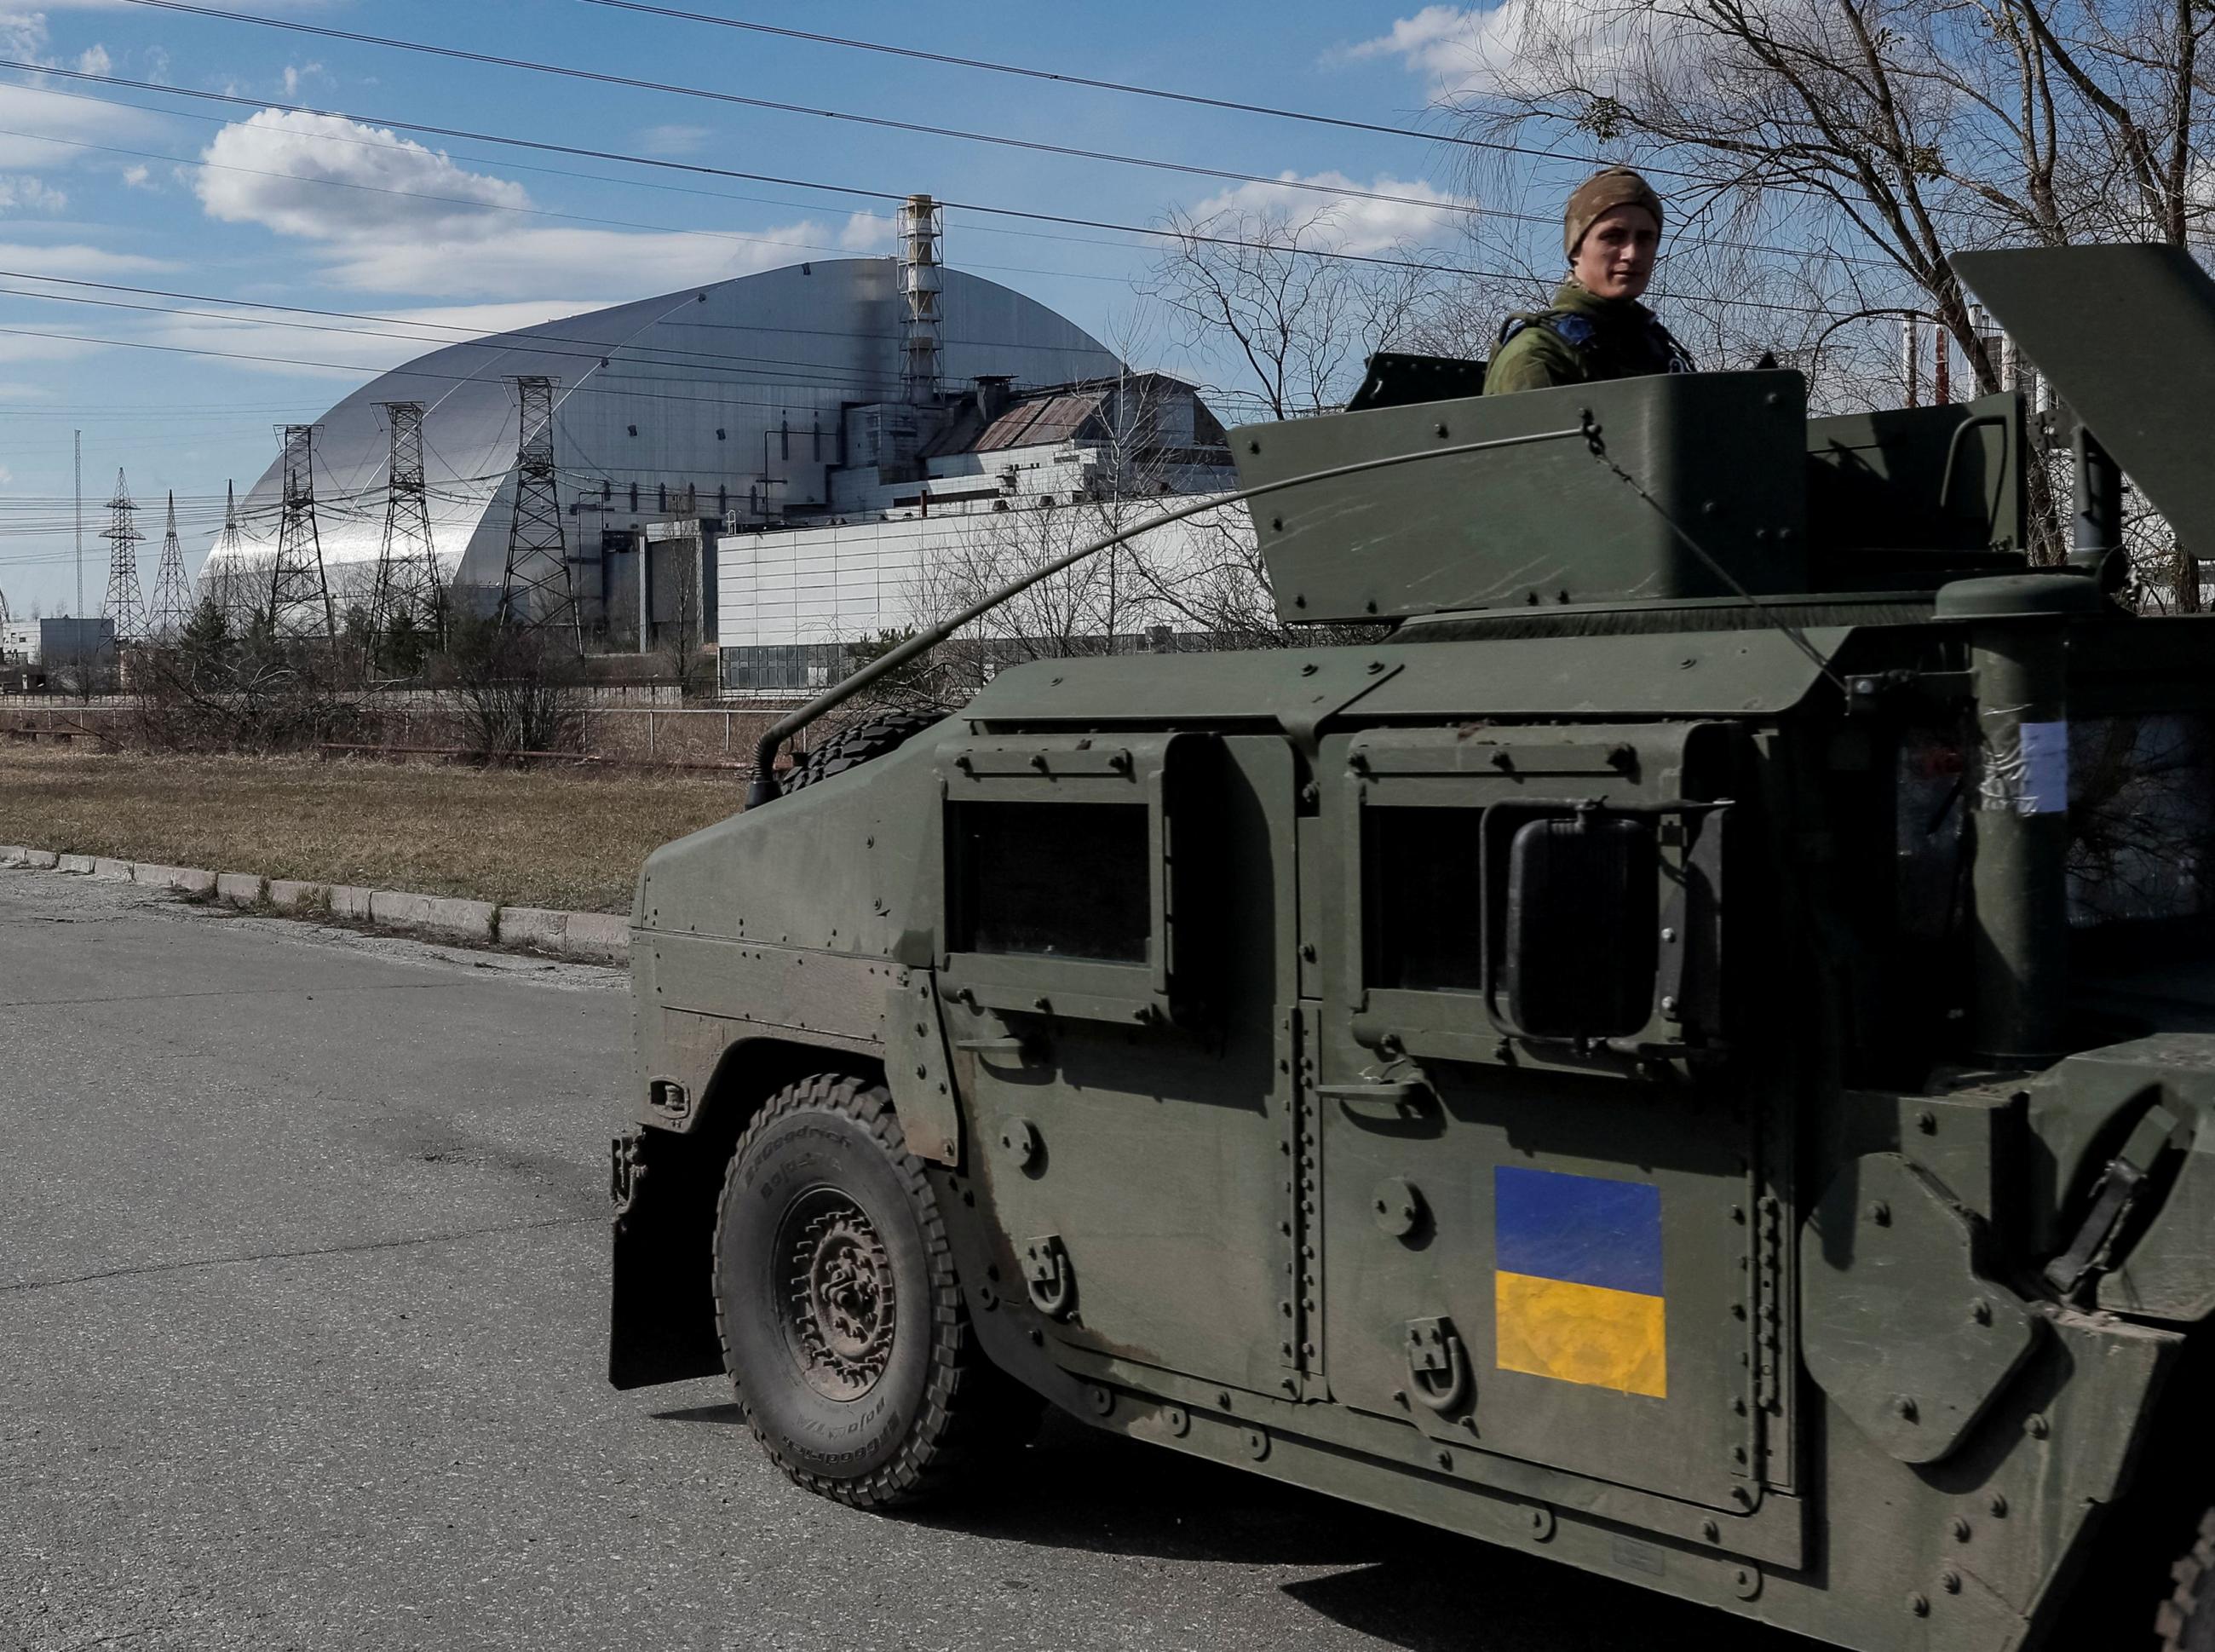 Ukrainian national guardsmen drive a green military vehicle emblazoned with the blue and yellow Ukrainian flag patrol the area near the Chernobyl Nuclear Power Plant. In the background looms the silver dome of a nuclear power plant building. 